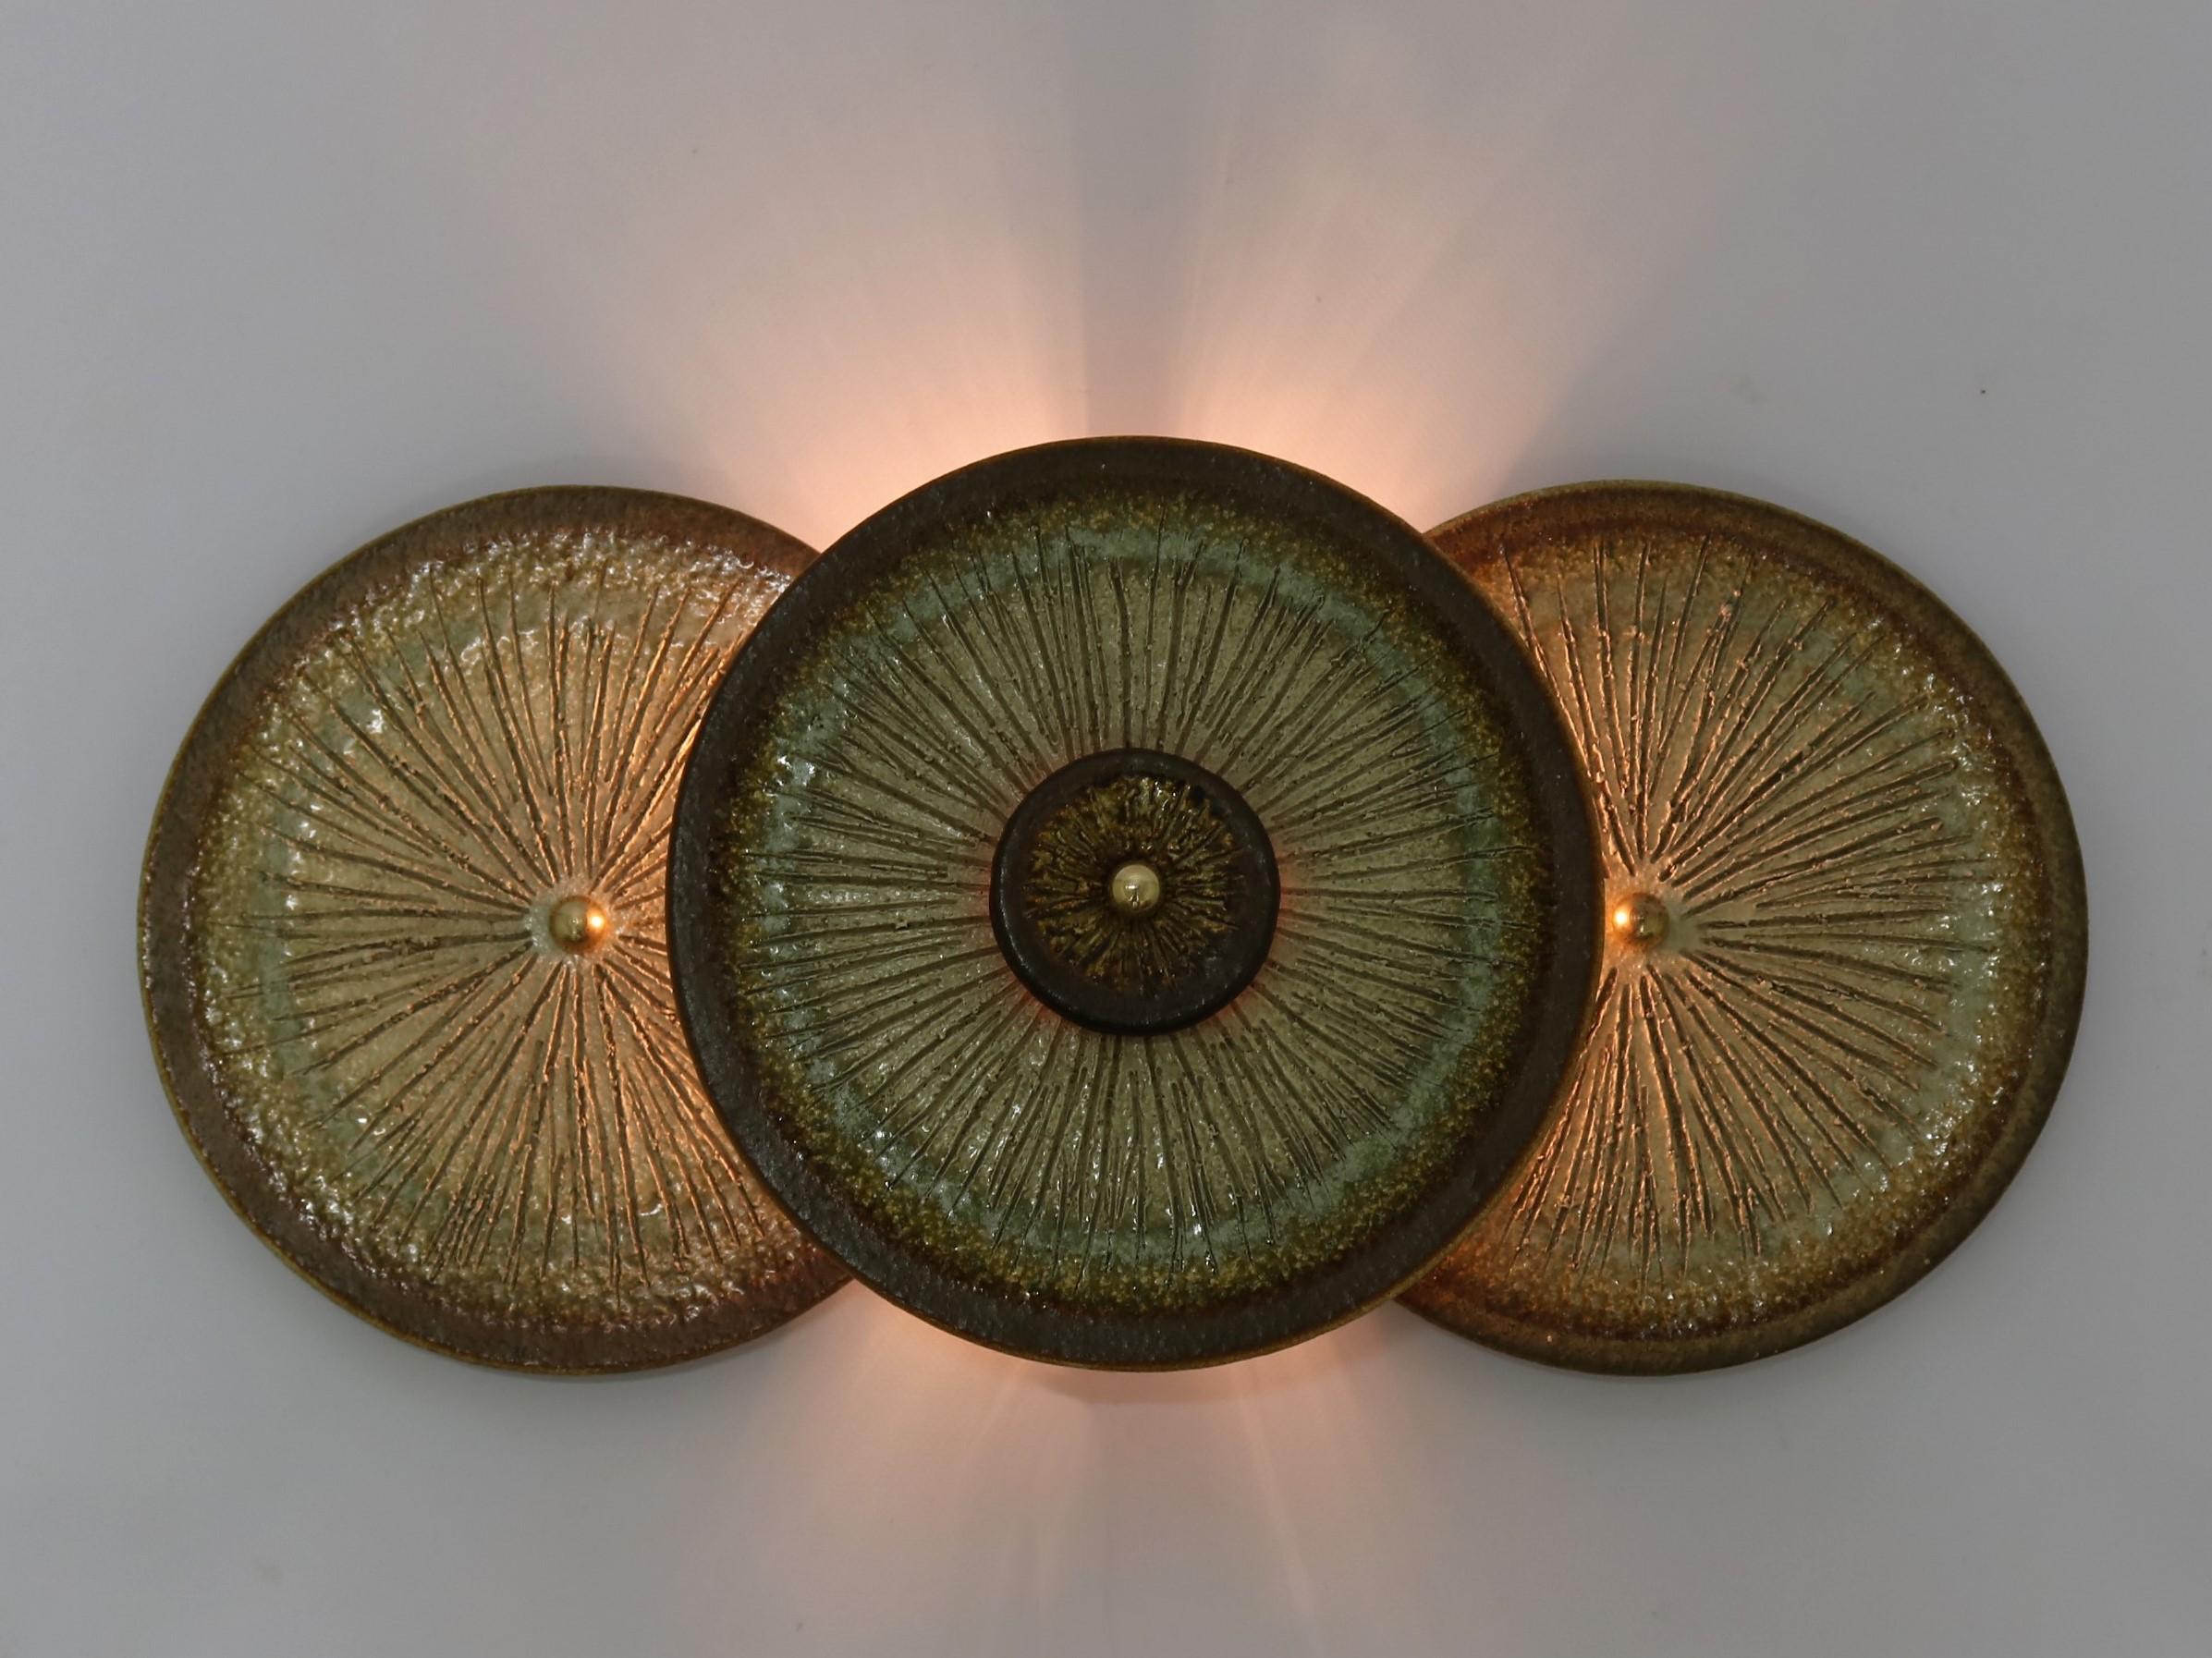 A stunning wall light or decoration by Noomi Backhausen and Poul Brandborg for Soholm/Denmark, circa 1960. The wall lamp is made from glazed stoneware in the typical style of 1960s Danish ceramics. Equally beautiful in daylight or lit at evening.